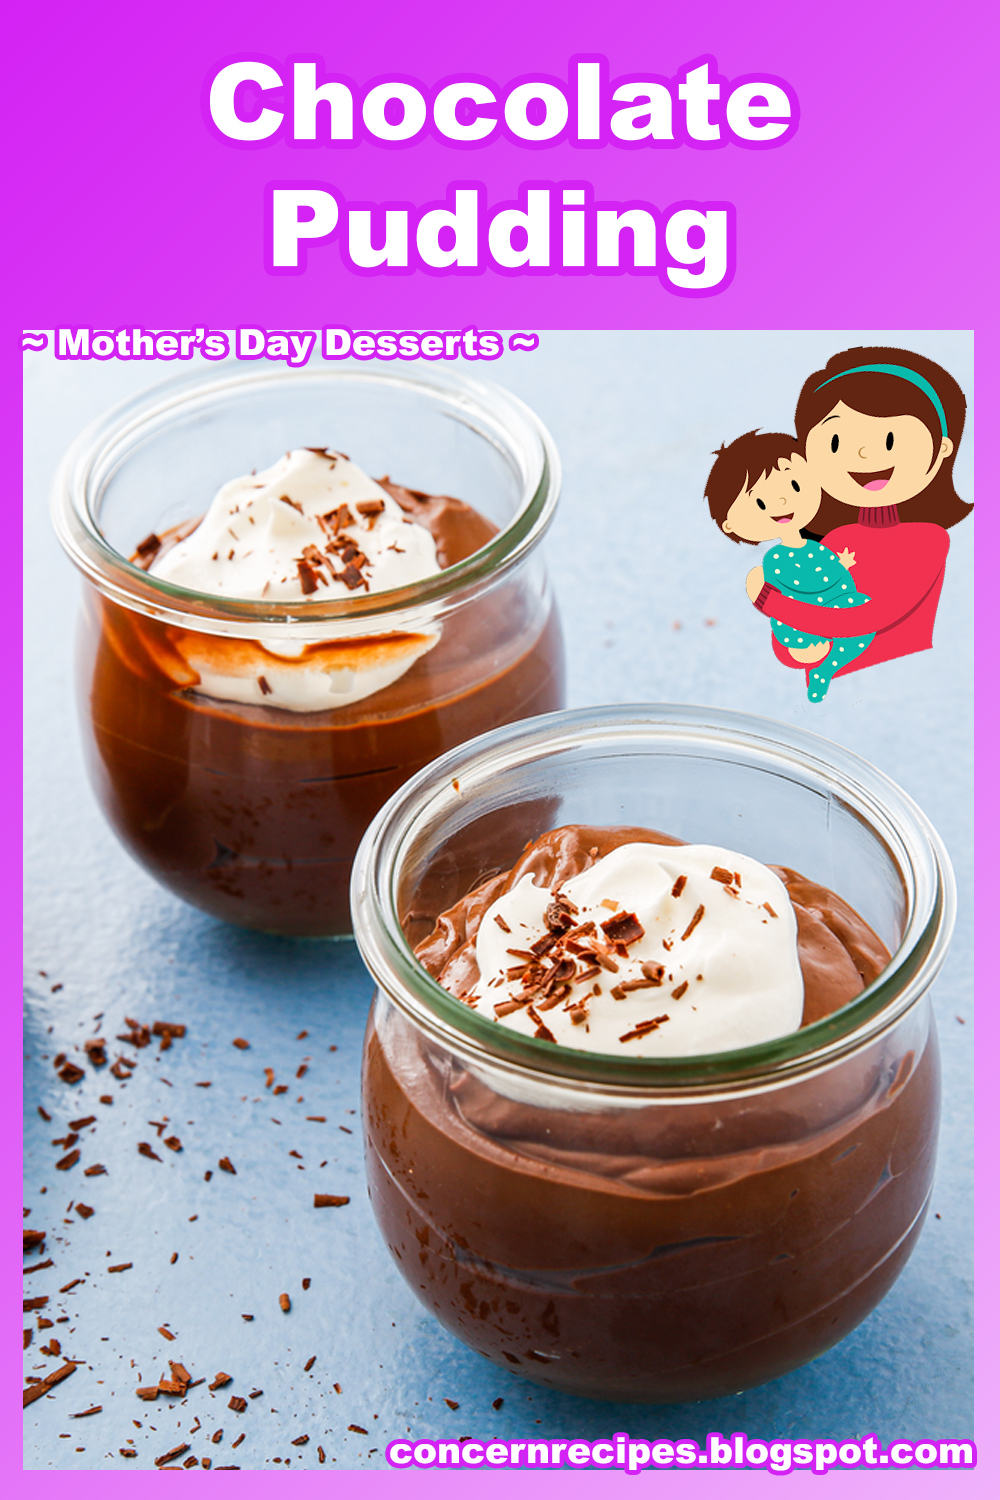 Chocolate Pudding - Mother's Day Desserts